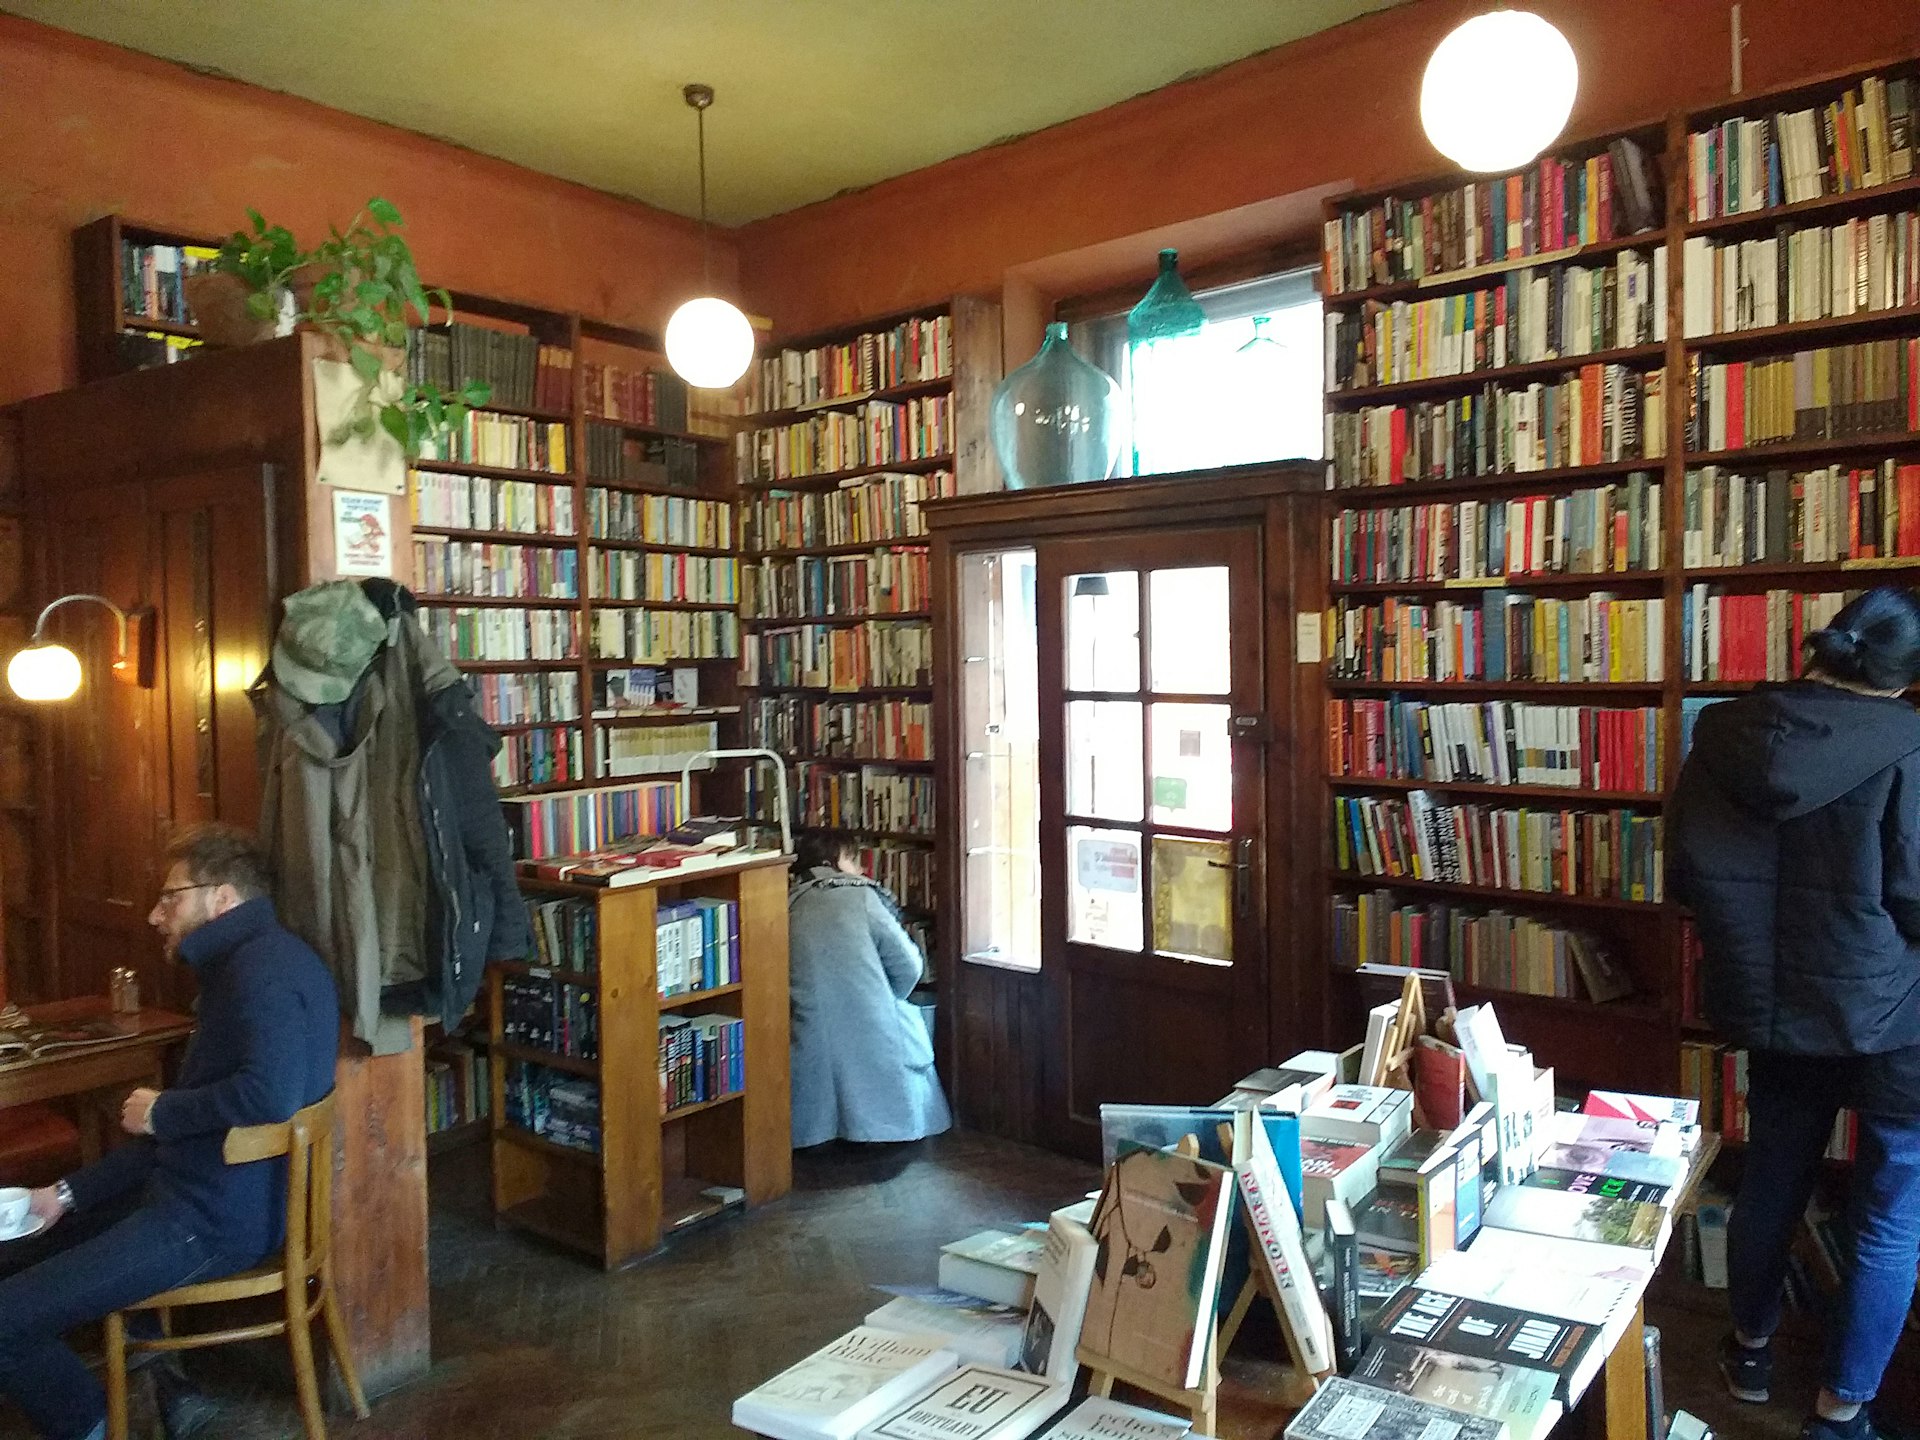 Interior shot of Massolit Books & Cafe, showing people browsing the books in the floor-to-ceiling bookcases.